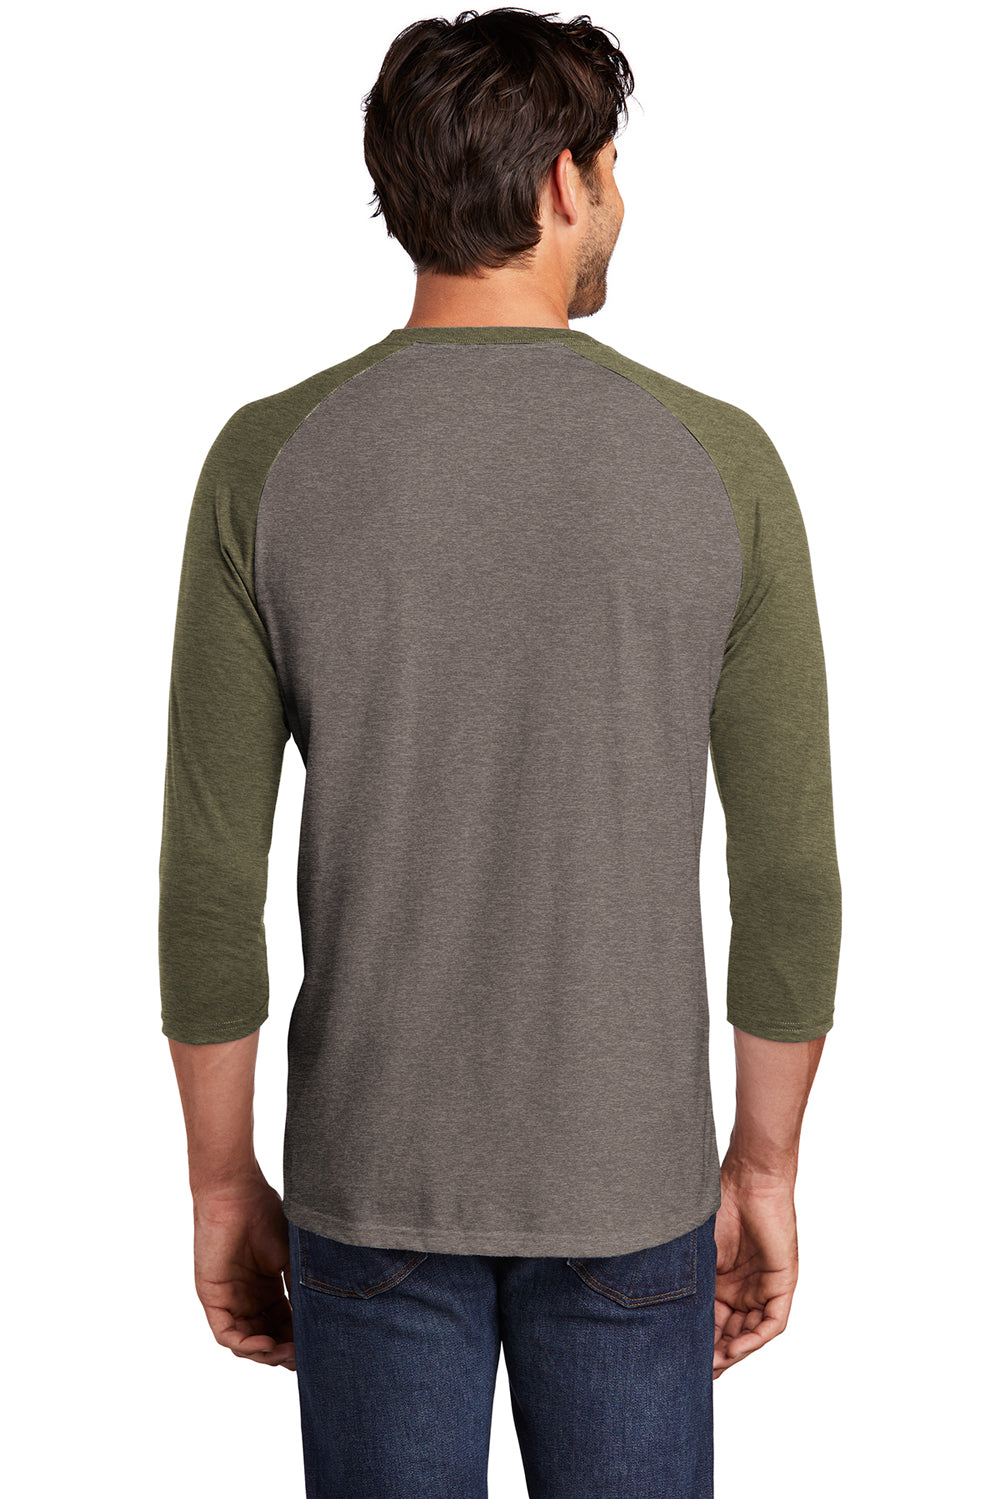 District DM136 Mens Perfect Tri 3/4 Sleeve Crewneck T-Shirt Grey Frost/Military Green Frost Back